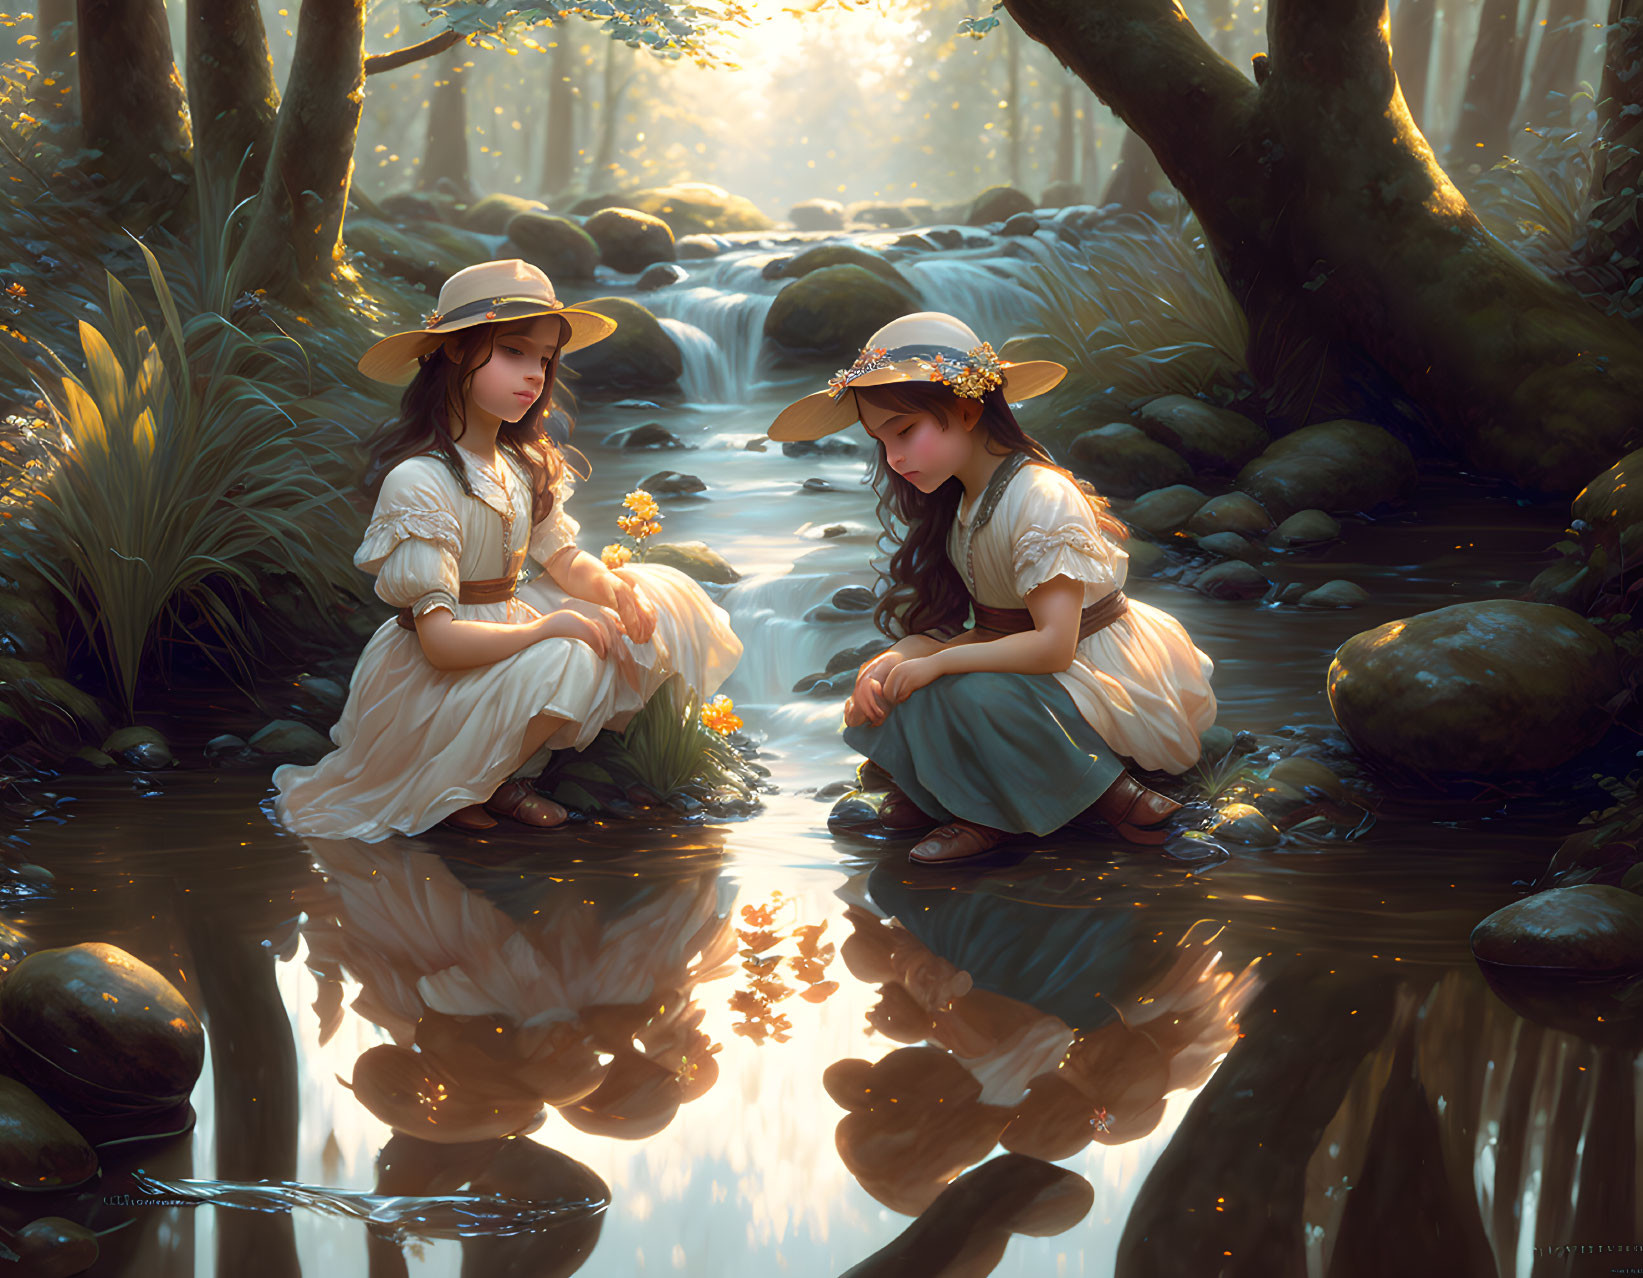 Two girls in vintage dresses and hats by a woodland stream in soft sunlight.